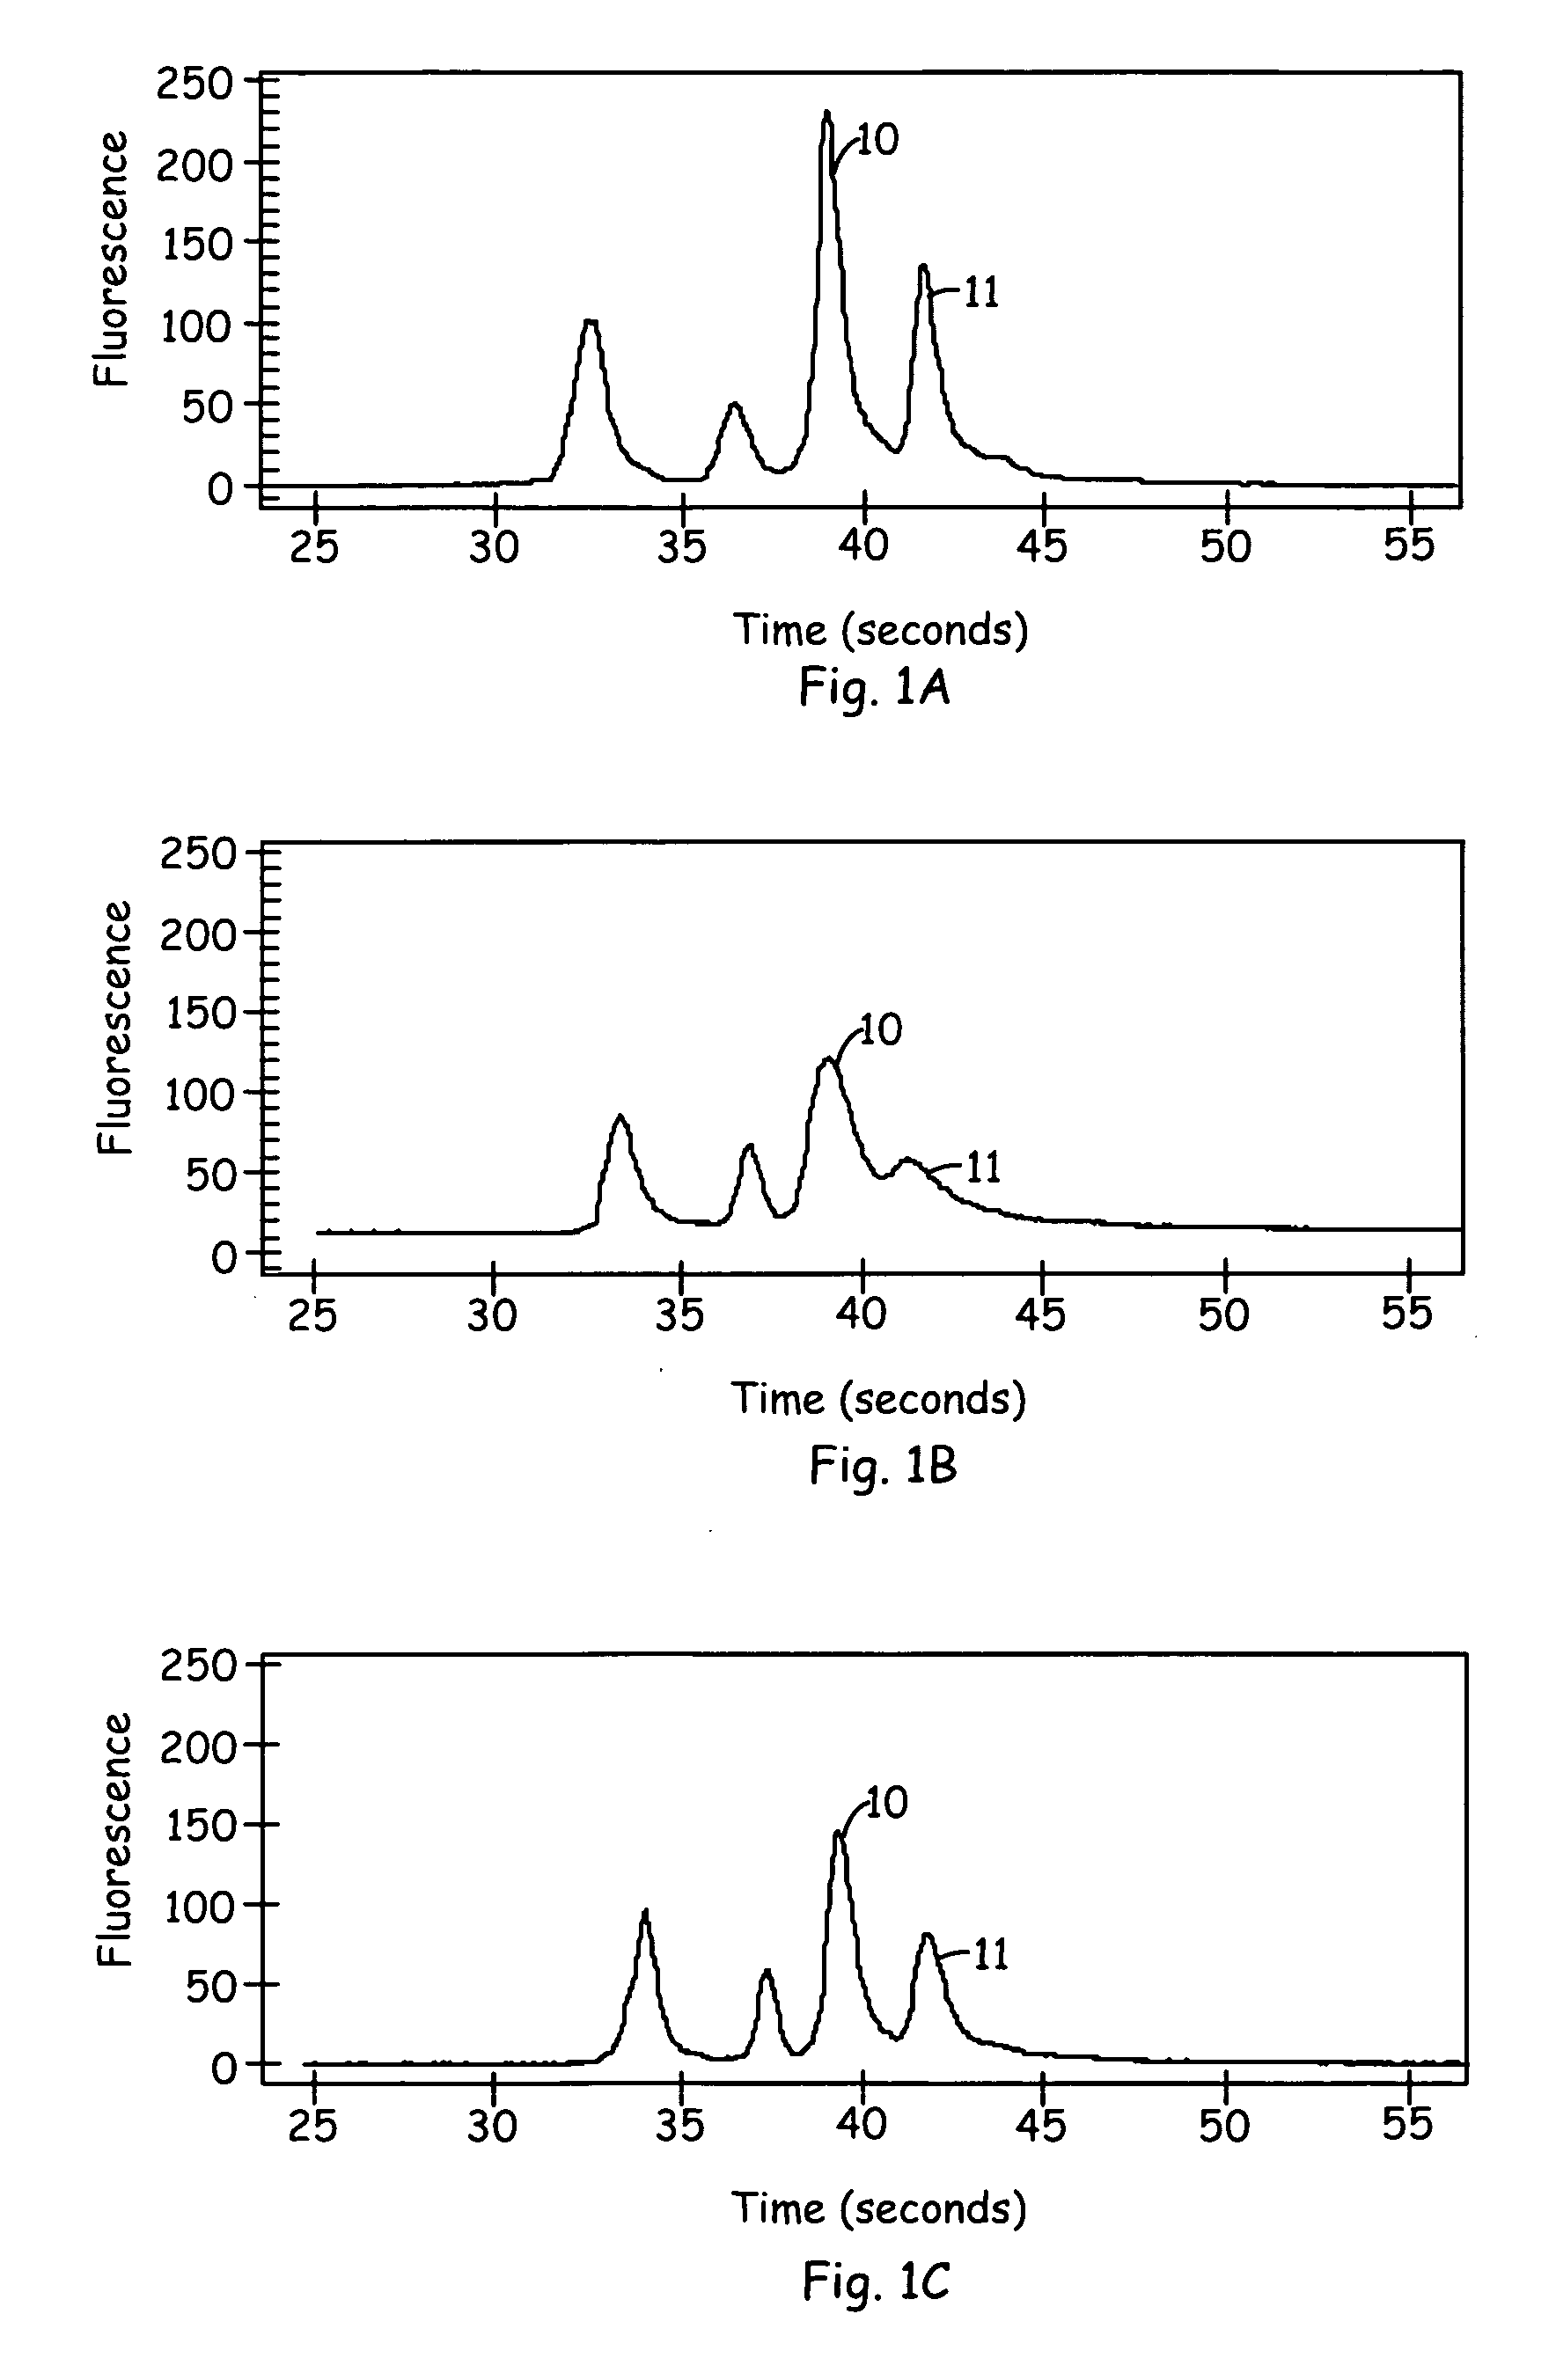 Reduction of migration shift assay interference